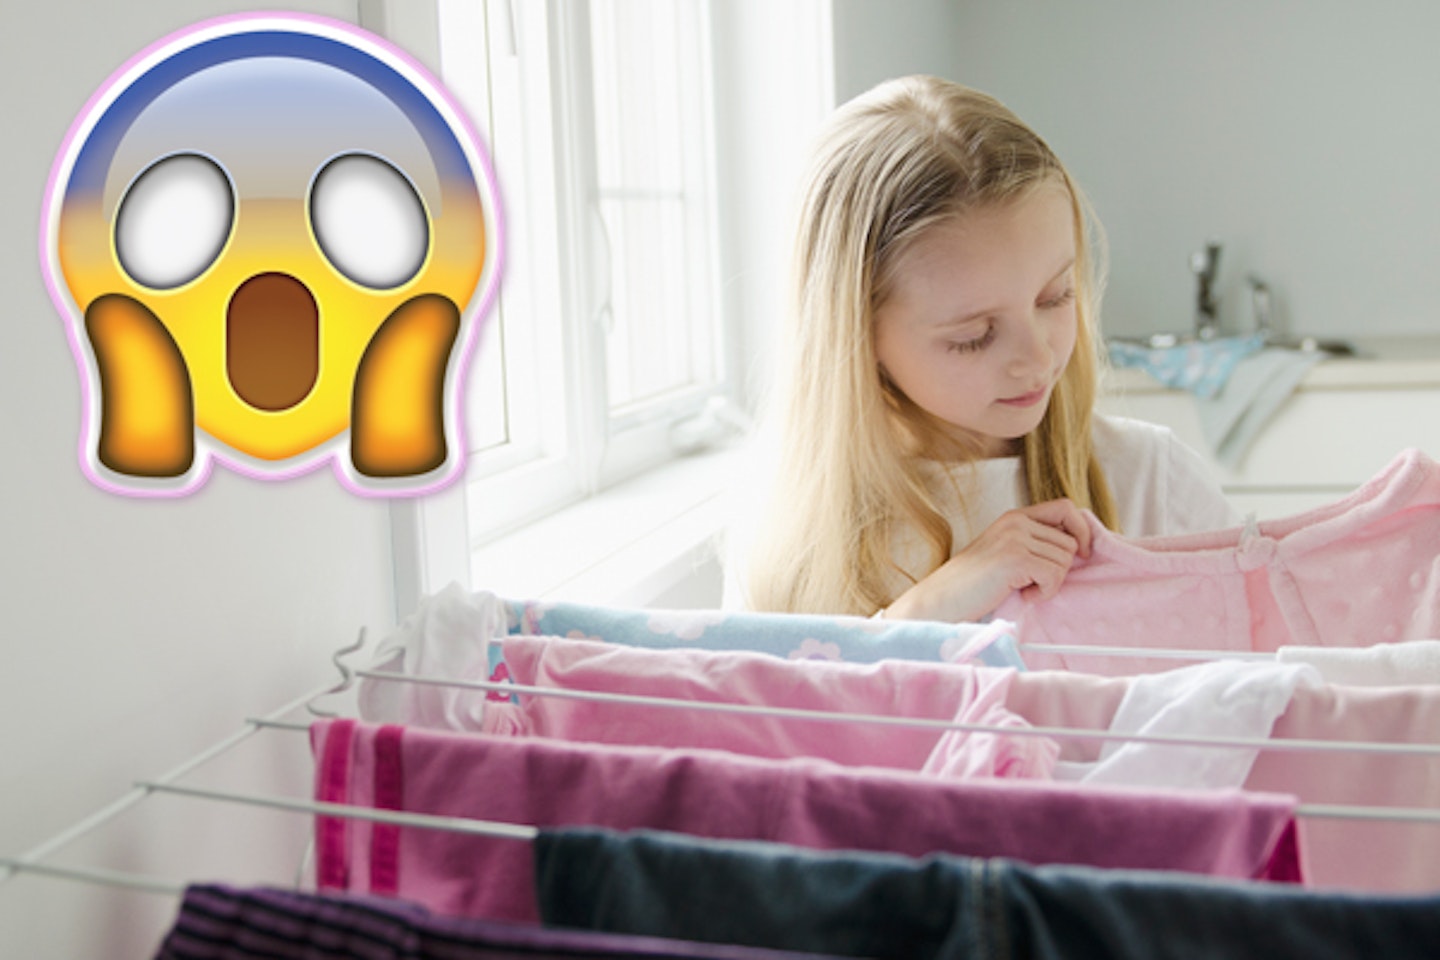 Washing clothes indoors could cause asthma 